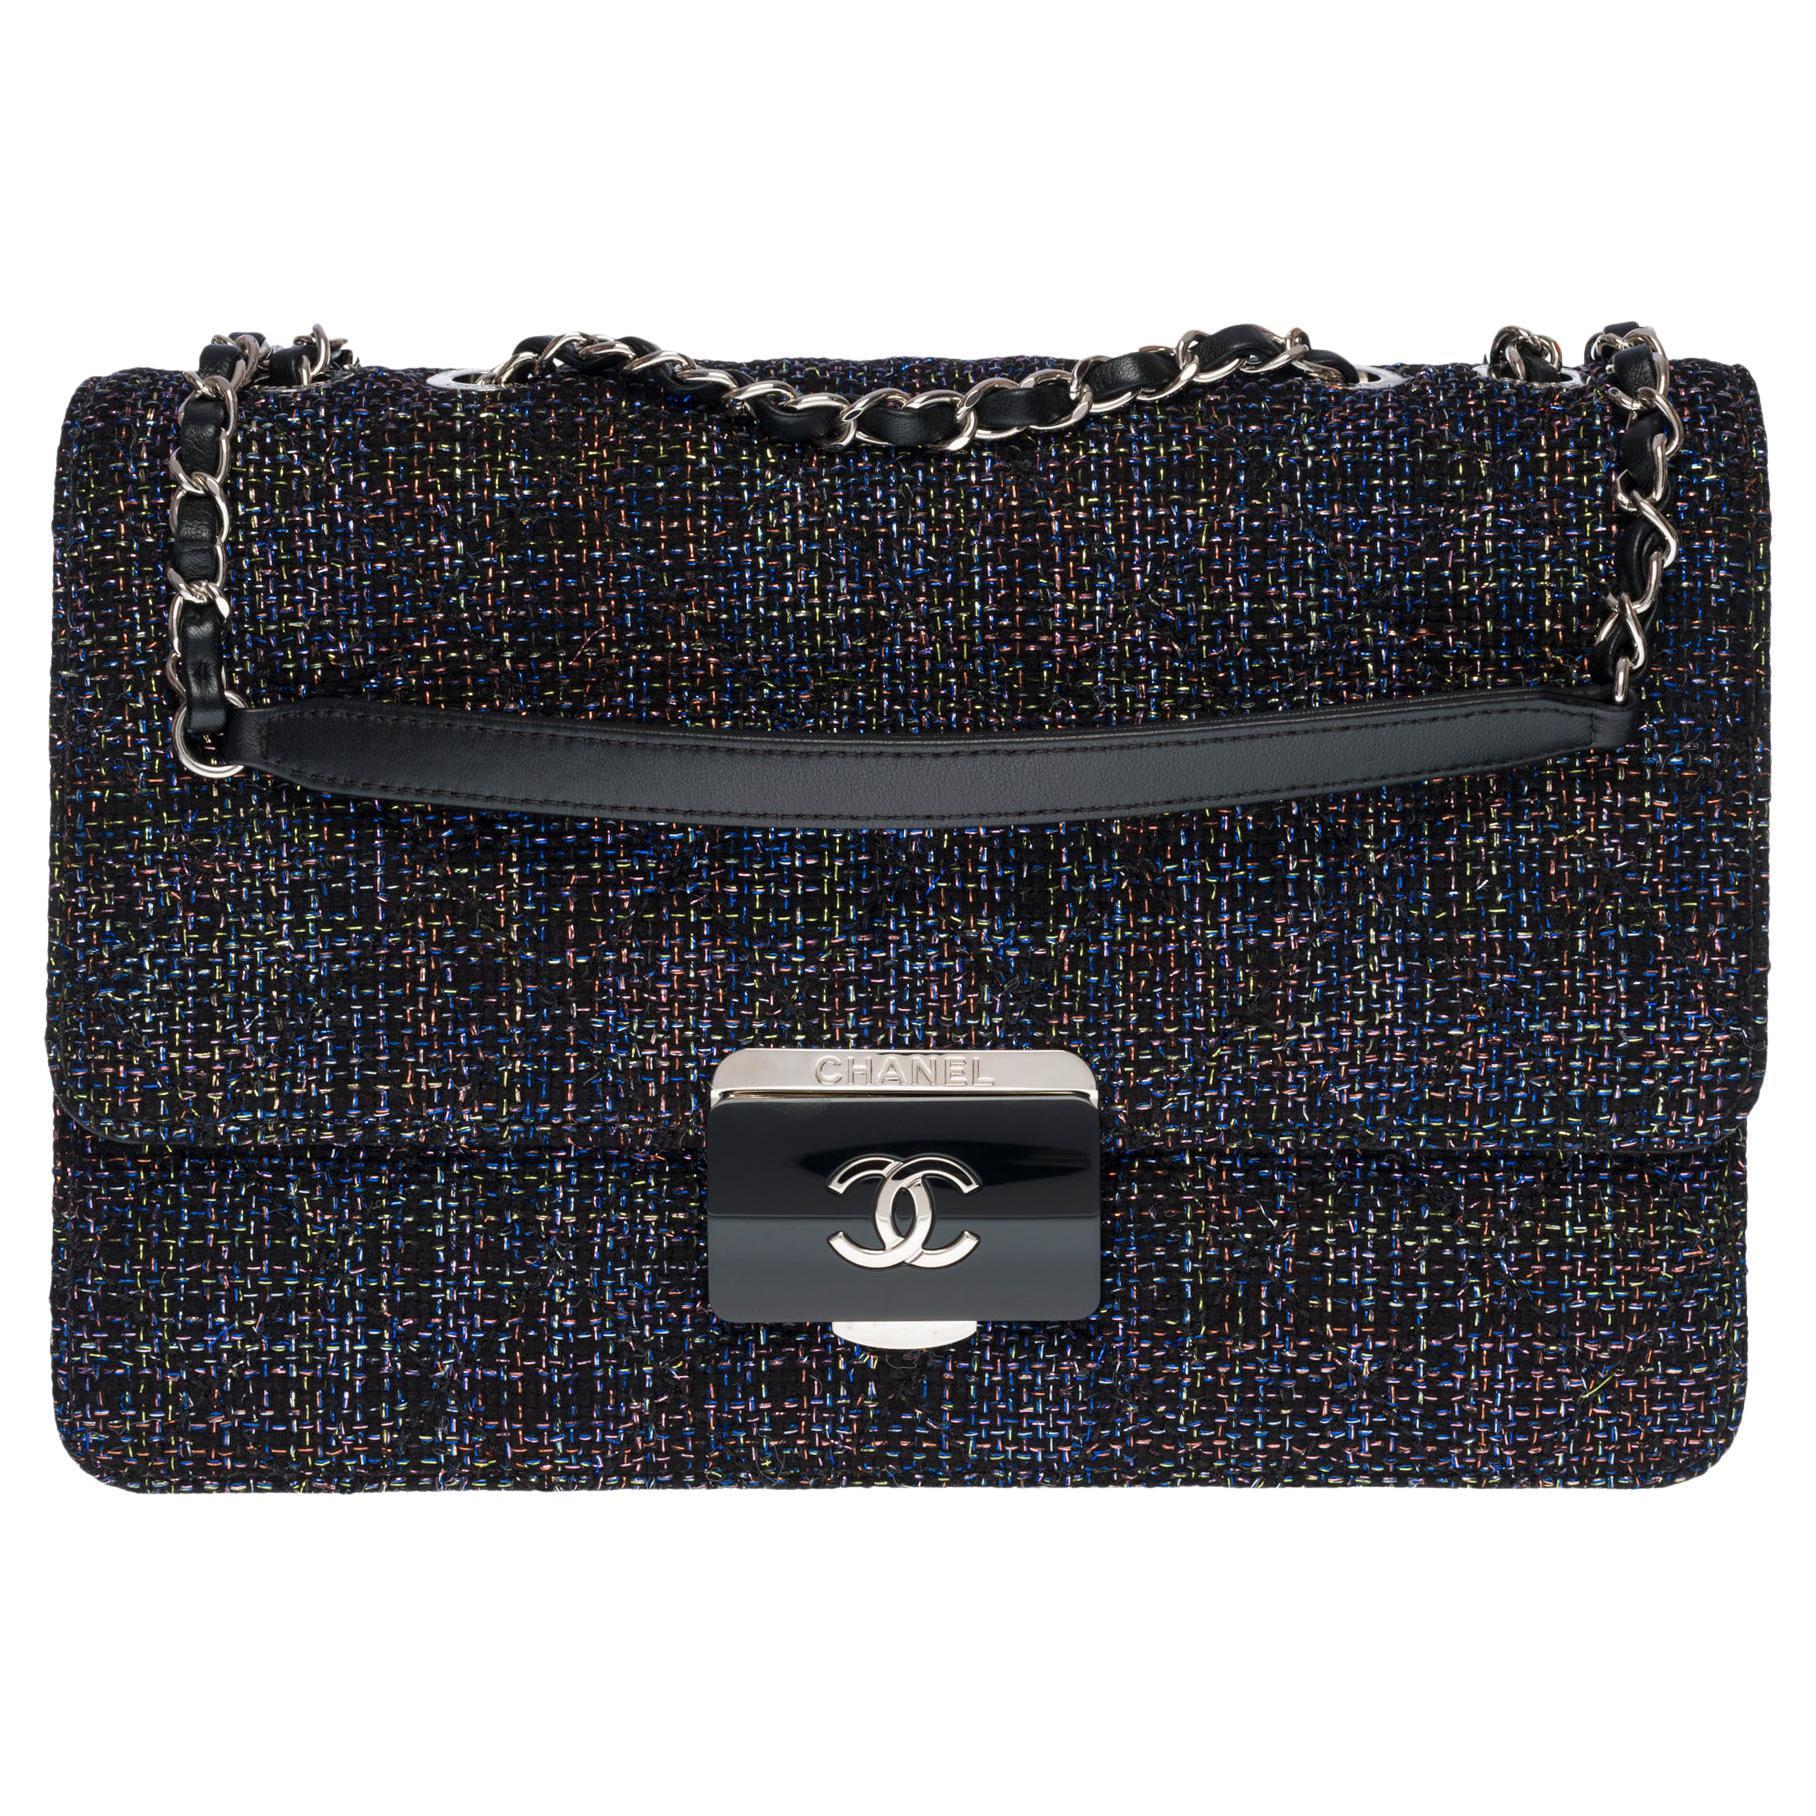 Chanel 2017  Rare Tweed Lambskin Quilted Beauty Lock Multicolor Black Flap Bag

Stunning Silver CC Push lock
Black leather with multicolored tweed
Silver chain black leather threaded shoulder straps
 
Dimensions: 11.41